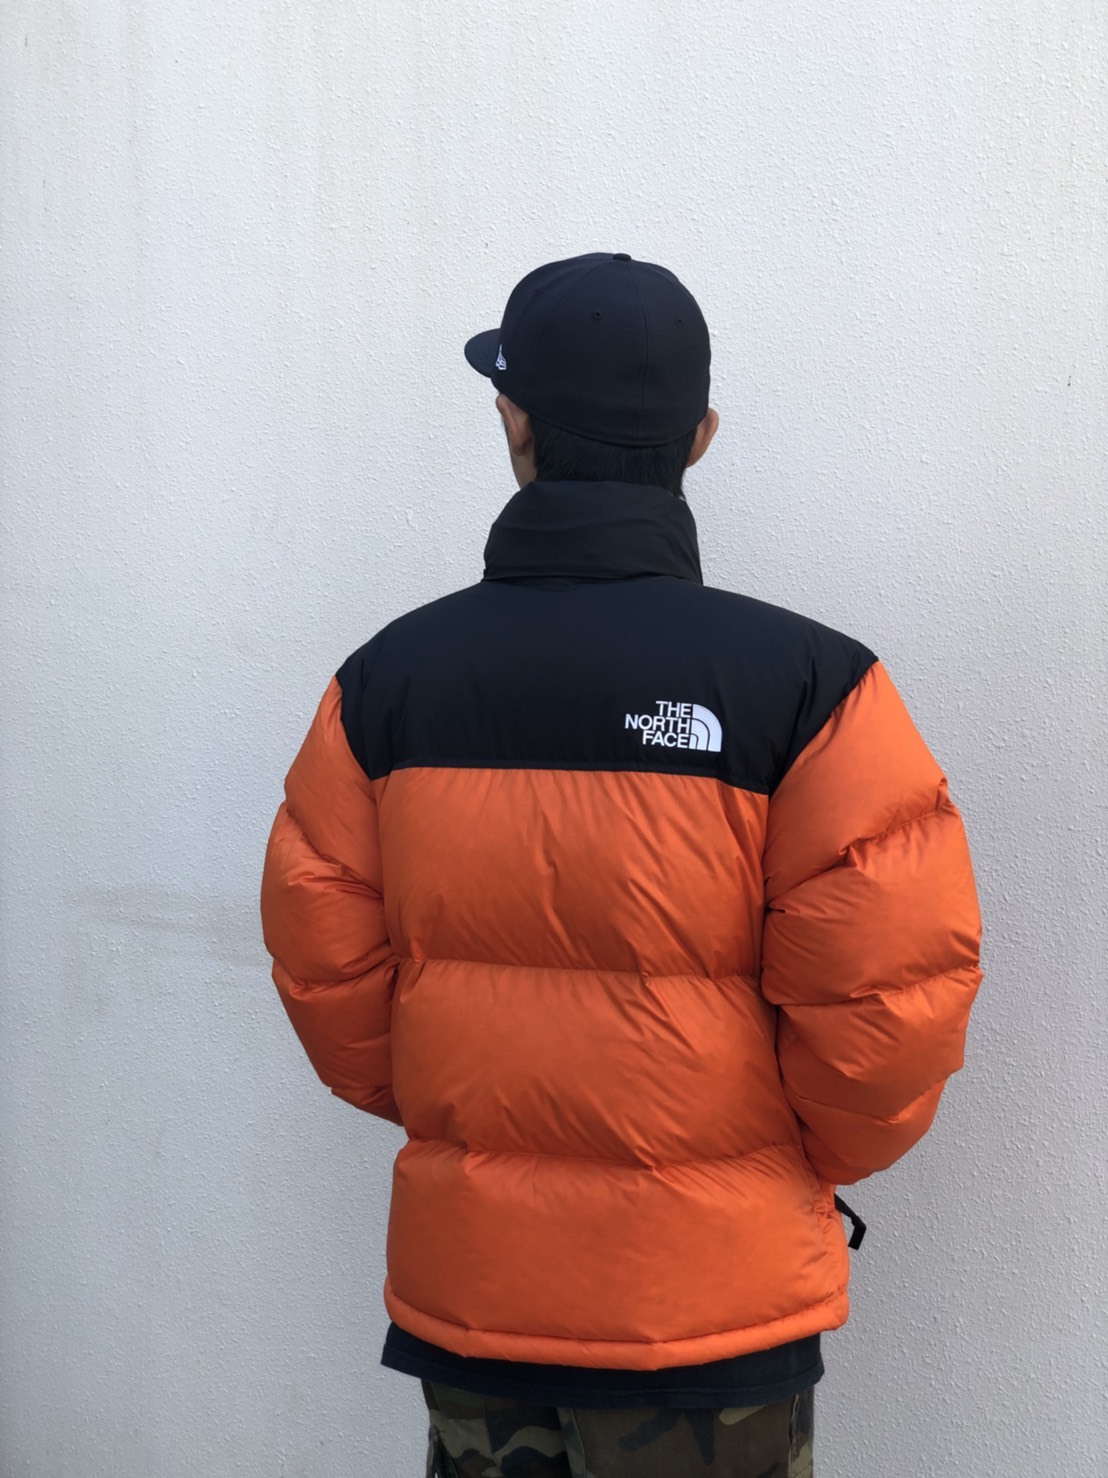 THE NORTH FACE 1996 RETRO NUPTSE JACKET！！！ : Eightys Antiques blog